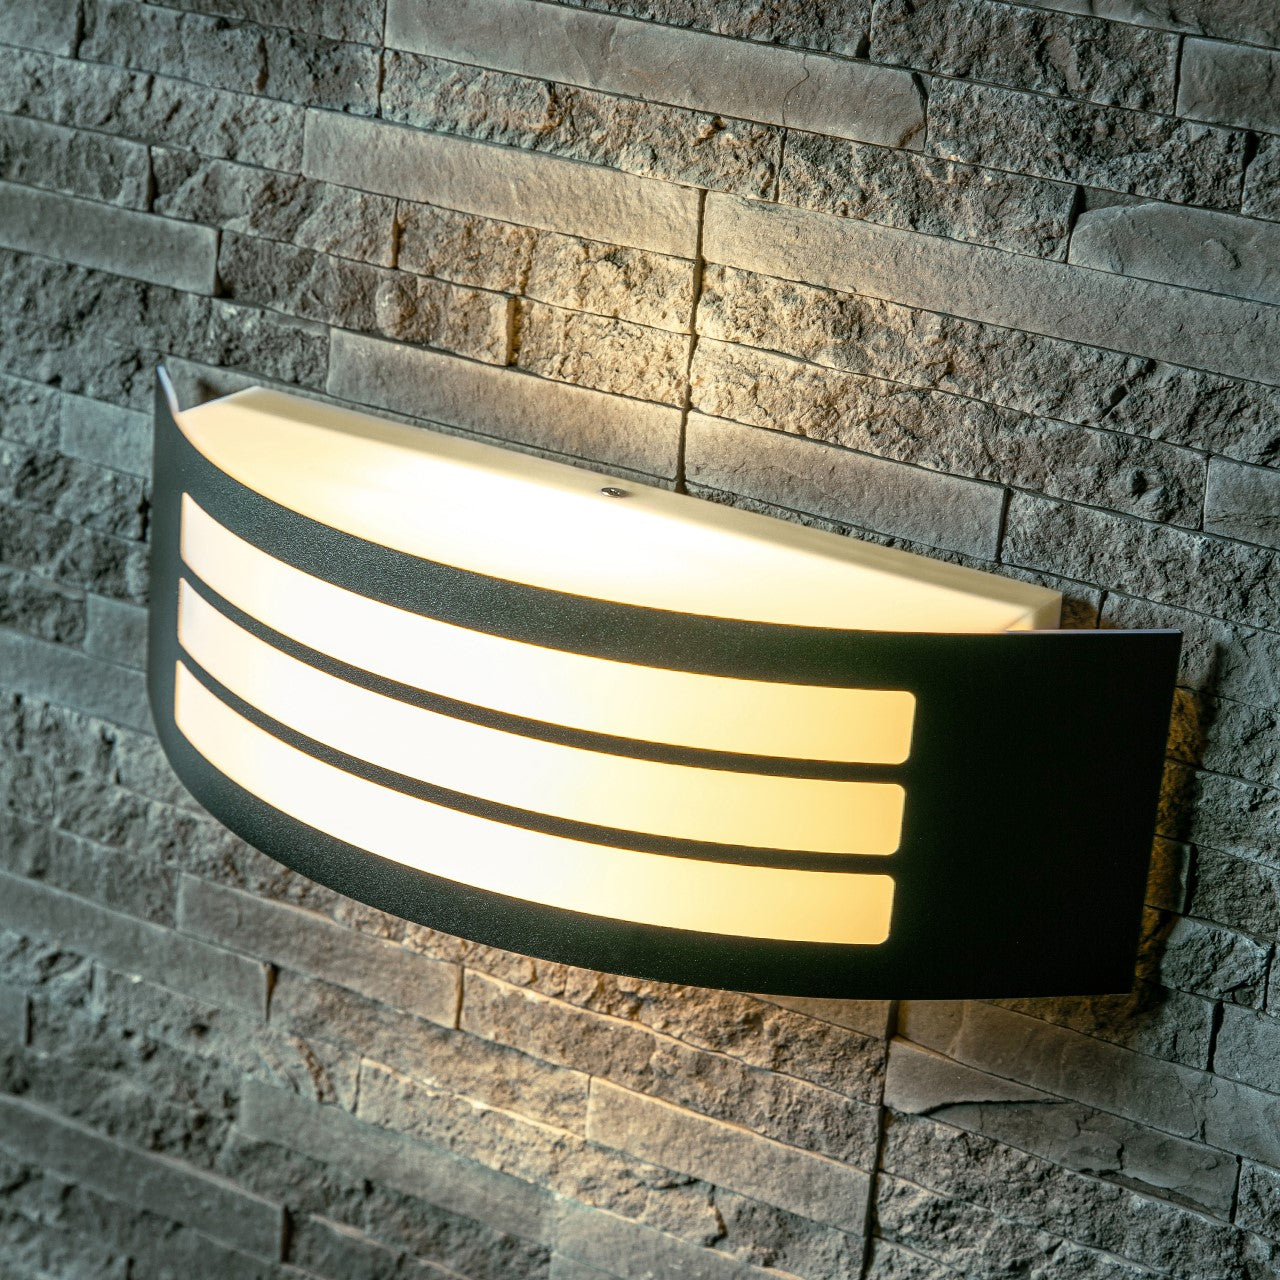 This stylish Striker outdoor light boasts a polycarbonate shade, crafted from stainless steel and adorned with a series of narrow stripes. Its surface disperses the lamp's light uniformly, creating a tranquil, inviting ambiance both indoors and out.